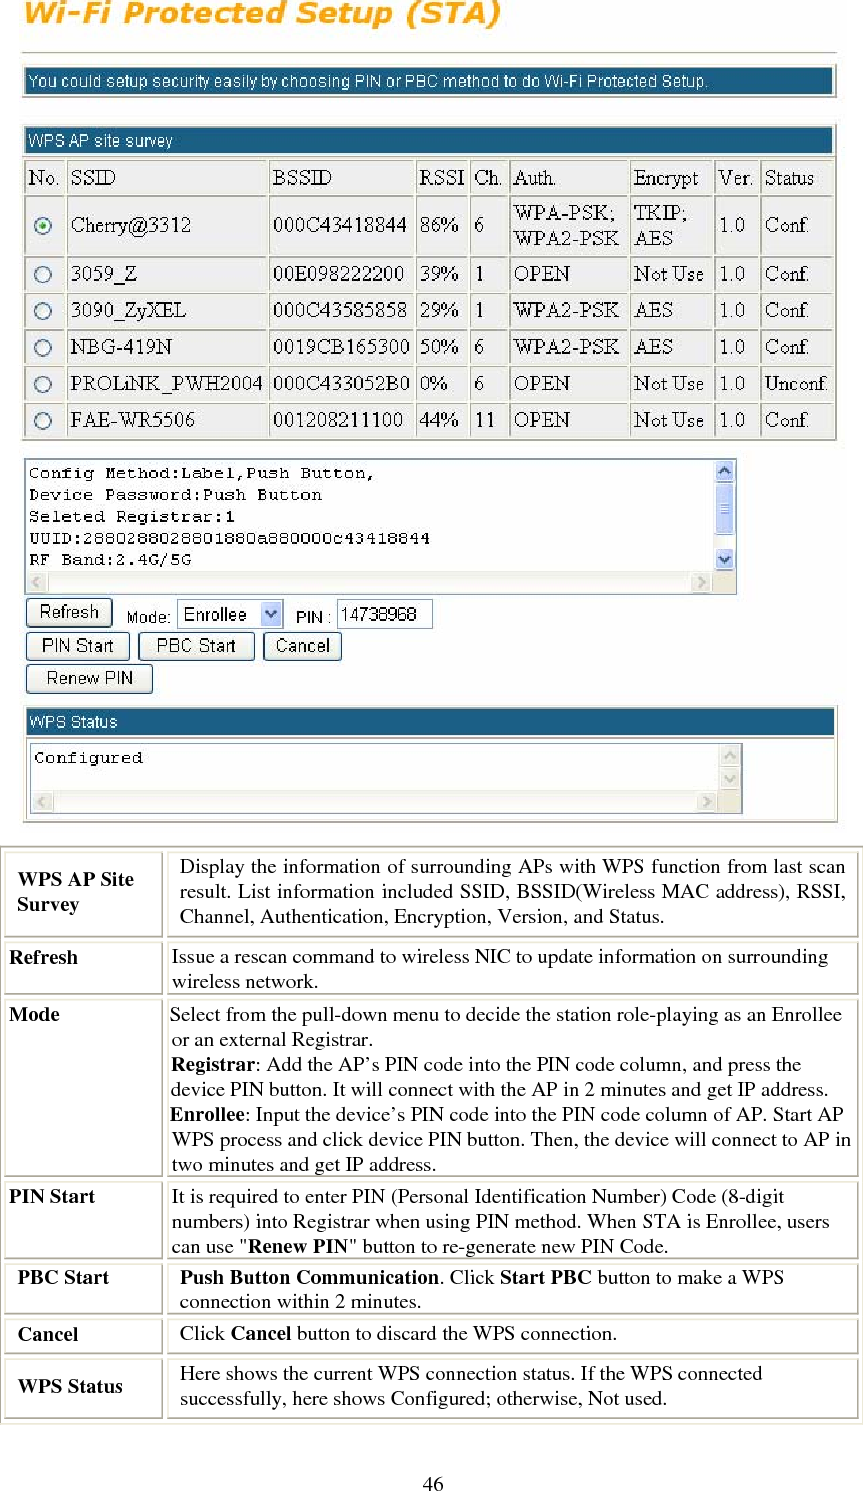   46 WPS AP Site Survey Display the information of surrounding APs with WPS function from last scan result. List information included SSID, BSSID(Wireless MAC address), RSSI, Channel, Authentication, Encryption, Version, and Status. Refresh  Issue a rescan command to wireless NIC to update information on surrounding wireless network. Mode  Select from the pull-down menu to decide the station role-playing as an Enrollee or an external Registrar. Registrar: Add the AP’s PIN code into the PIN code column, and press the device PIN button. It will connect with the AP in 2 minutes and get IP address.  Enrollee: Input the device’s PIN code into the PIN code column of AP. Start AP WPS process and click device PIN button. Then, the device will connect to AP in two minutes and get IP address. PIN Start  It is required to enter PIN (Personal Identification Number) Code (8-digit numbers) into Registrar when using PIN method. When STA is Enrollee, users can use &quot;Renew PIN&quot; button to re-generate new PIN Code. PBC Start  Push Button Communication. Click Start PBC button to make a WPS connection within 2 minutes. Cancel  Click Cancel button to discard the WPS connection. WPS Status   Here shows the current WPS connection status. If the WPS connected successfully, here shows Configured; otherwise, Not used. 